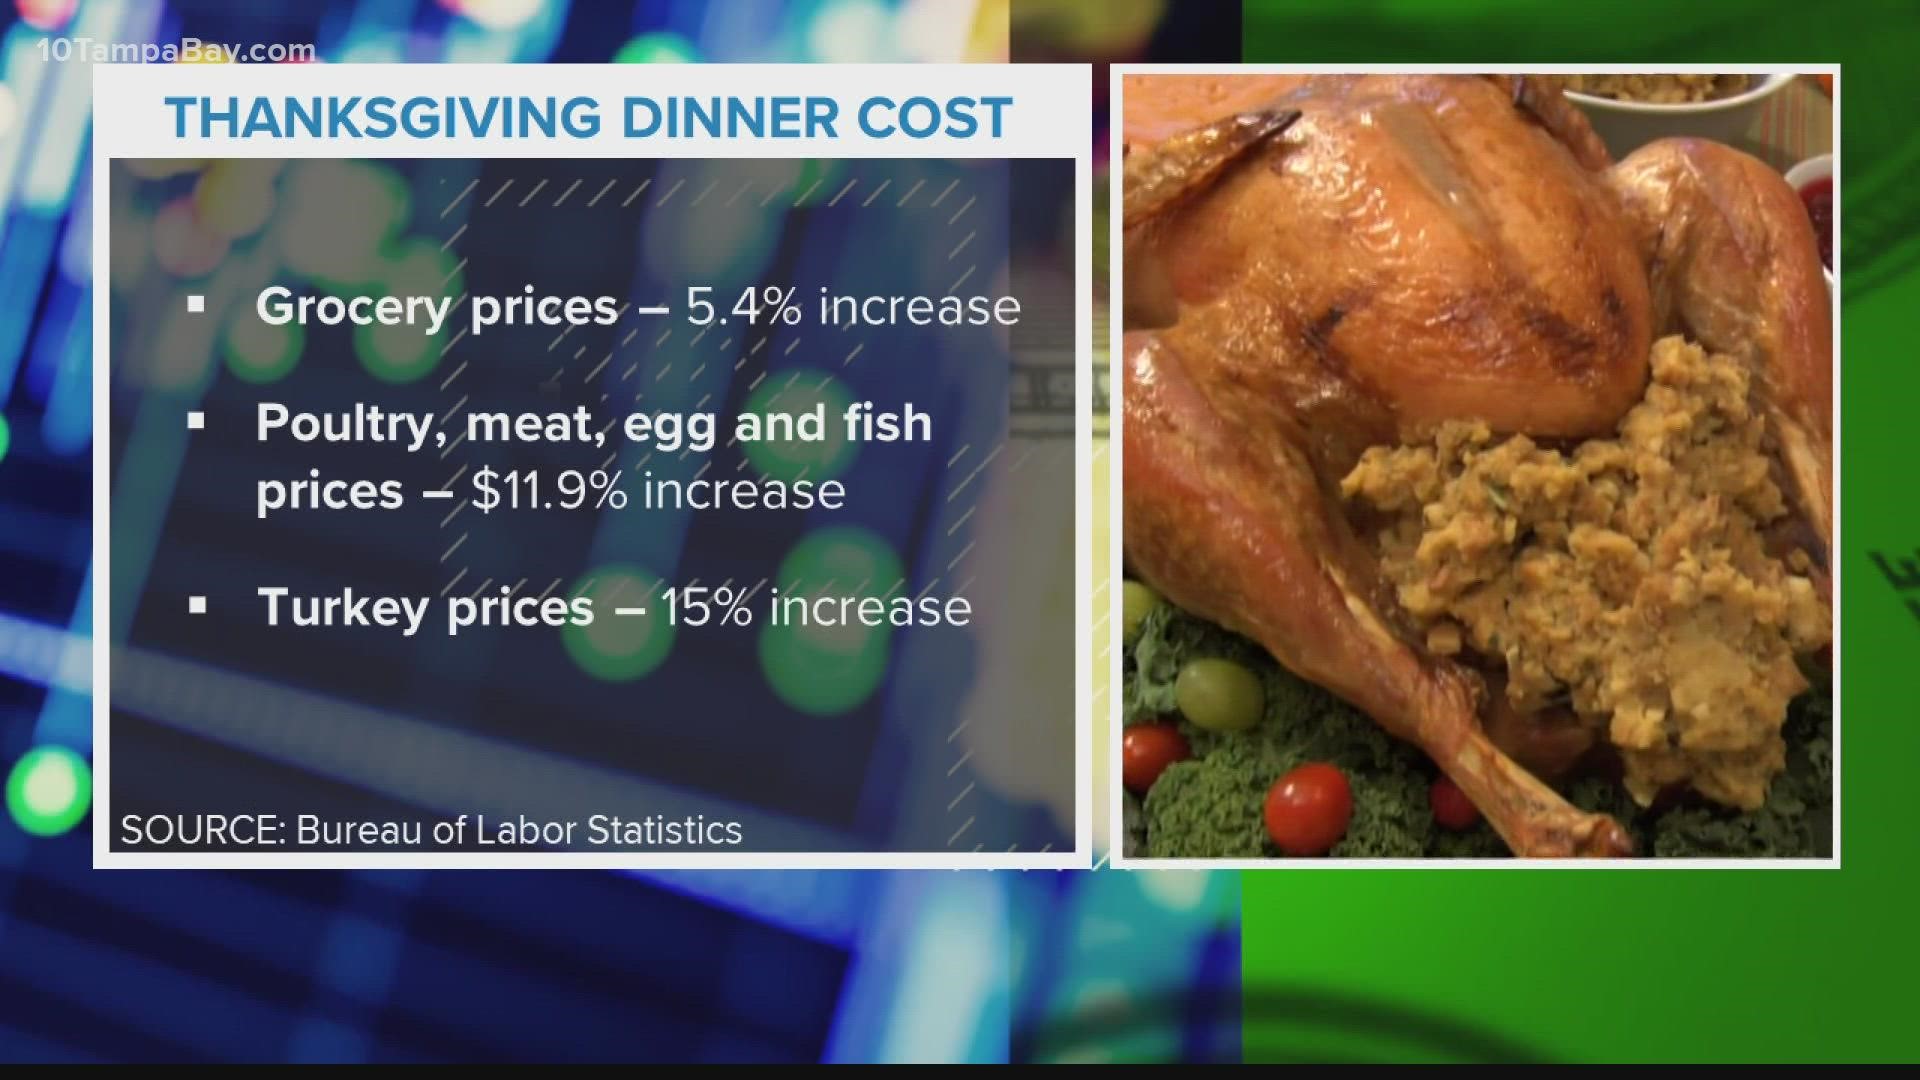 Rising inflation is making everything more expensive, including your Thanksgiving meal staples.